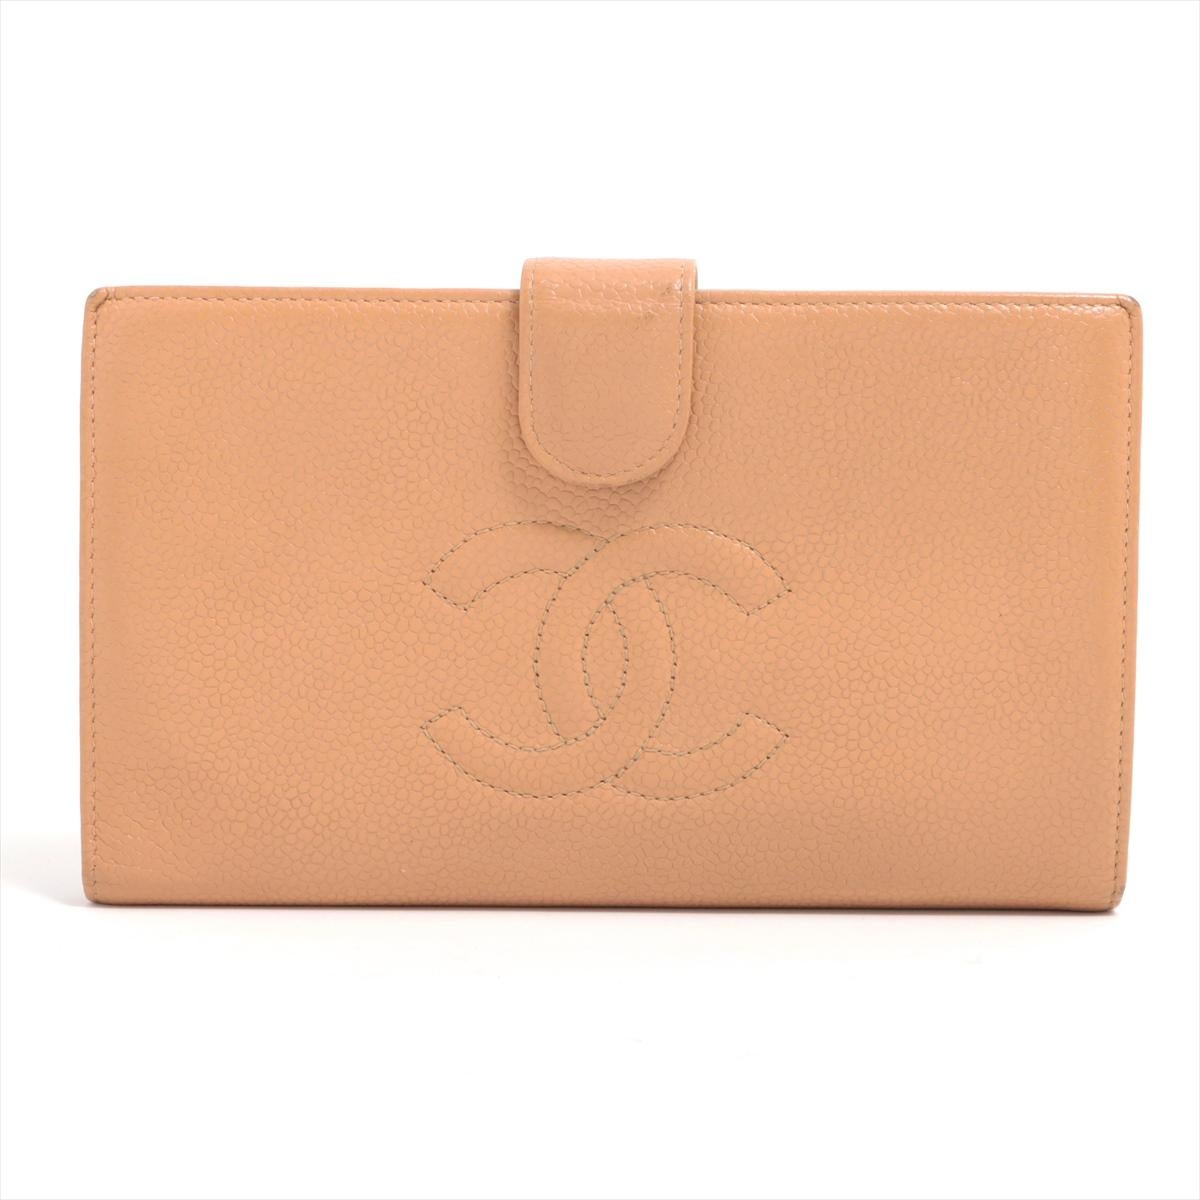 The Chanel CC Logo Caviar Skin Bi-fold Wallet in Brown Gold is a luxurious and timeless accessory that embodies the elegance of the Chanel brand. Crafted from high-quality caviar skin leather, known for its durability and distinctive texture, the